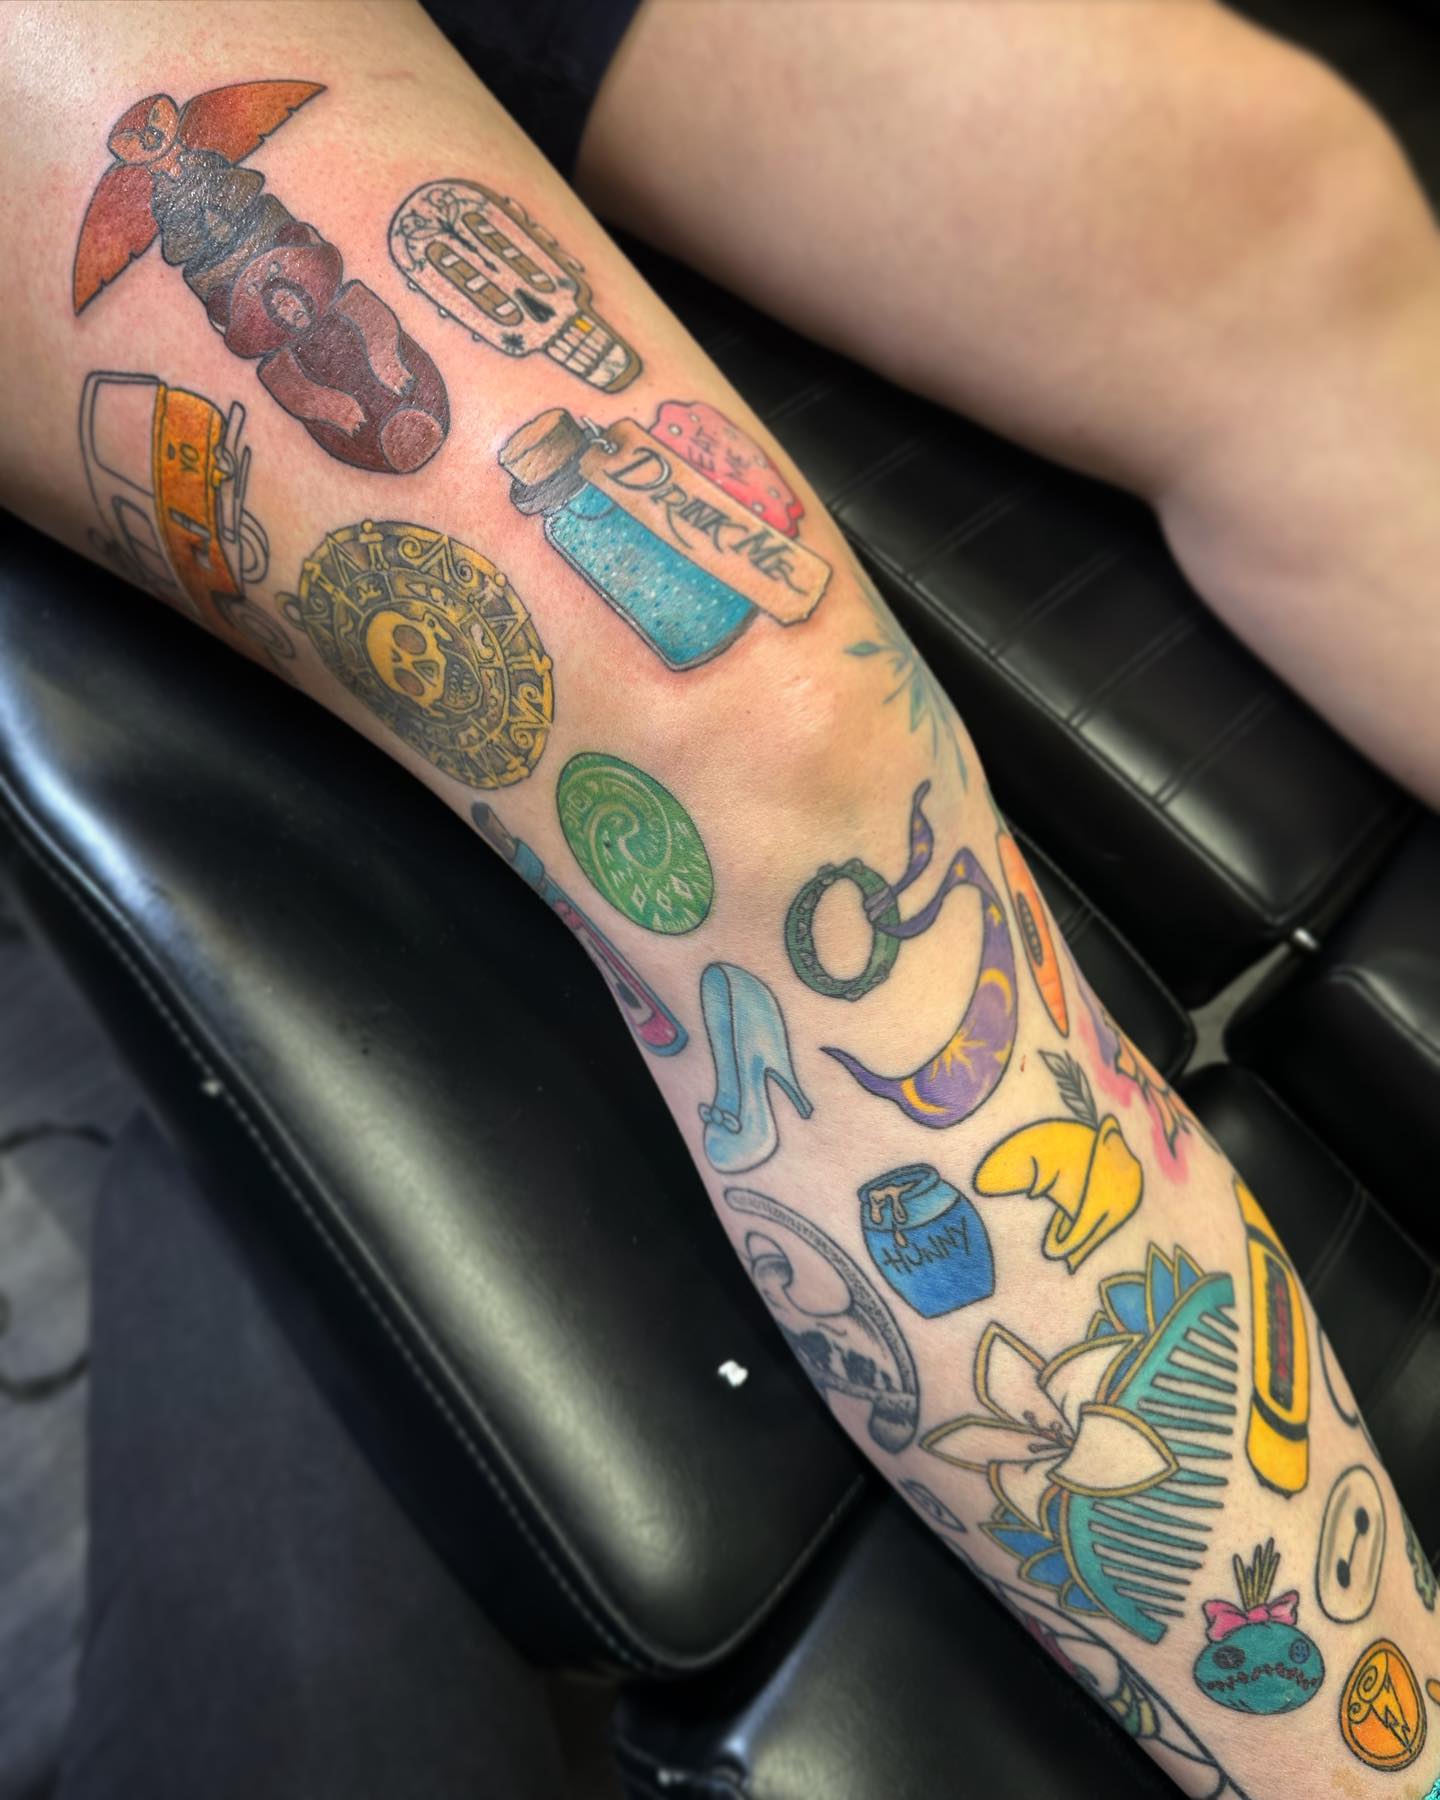 Joanna on Twitter scoob Ill forever be proud to wear my scooby doo  sleeve  art by alexpardee tattoo and addition of miner fortyniner by  hailly martin tattoos ScoobyDoo ScoobyDoo httpstcoQN6kUXDi0b 